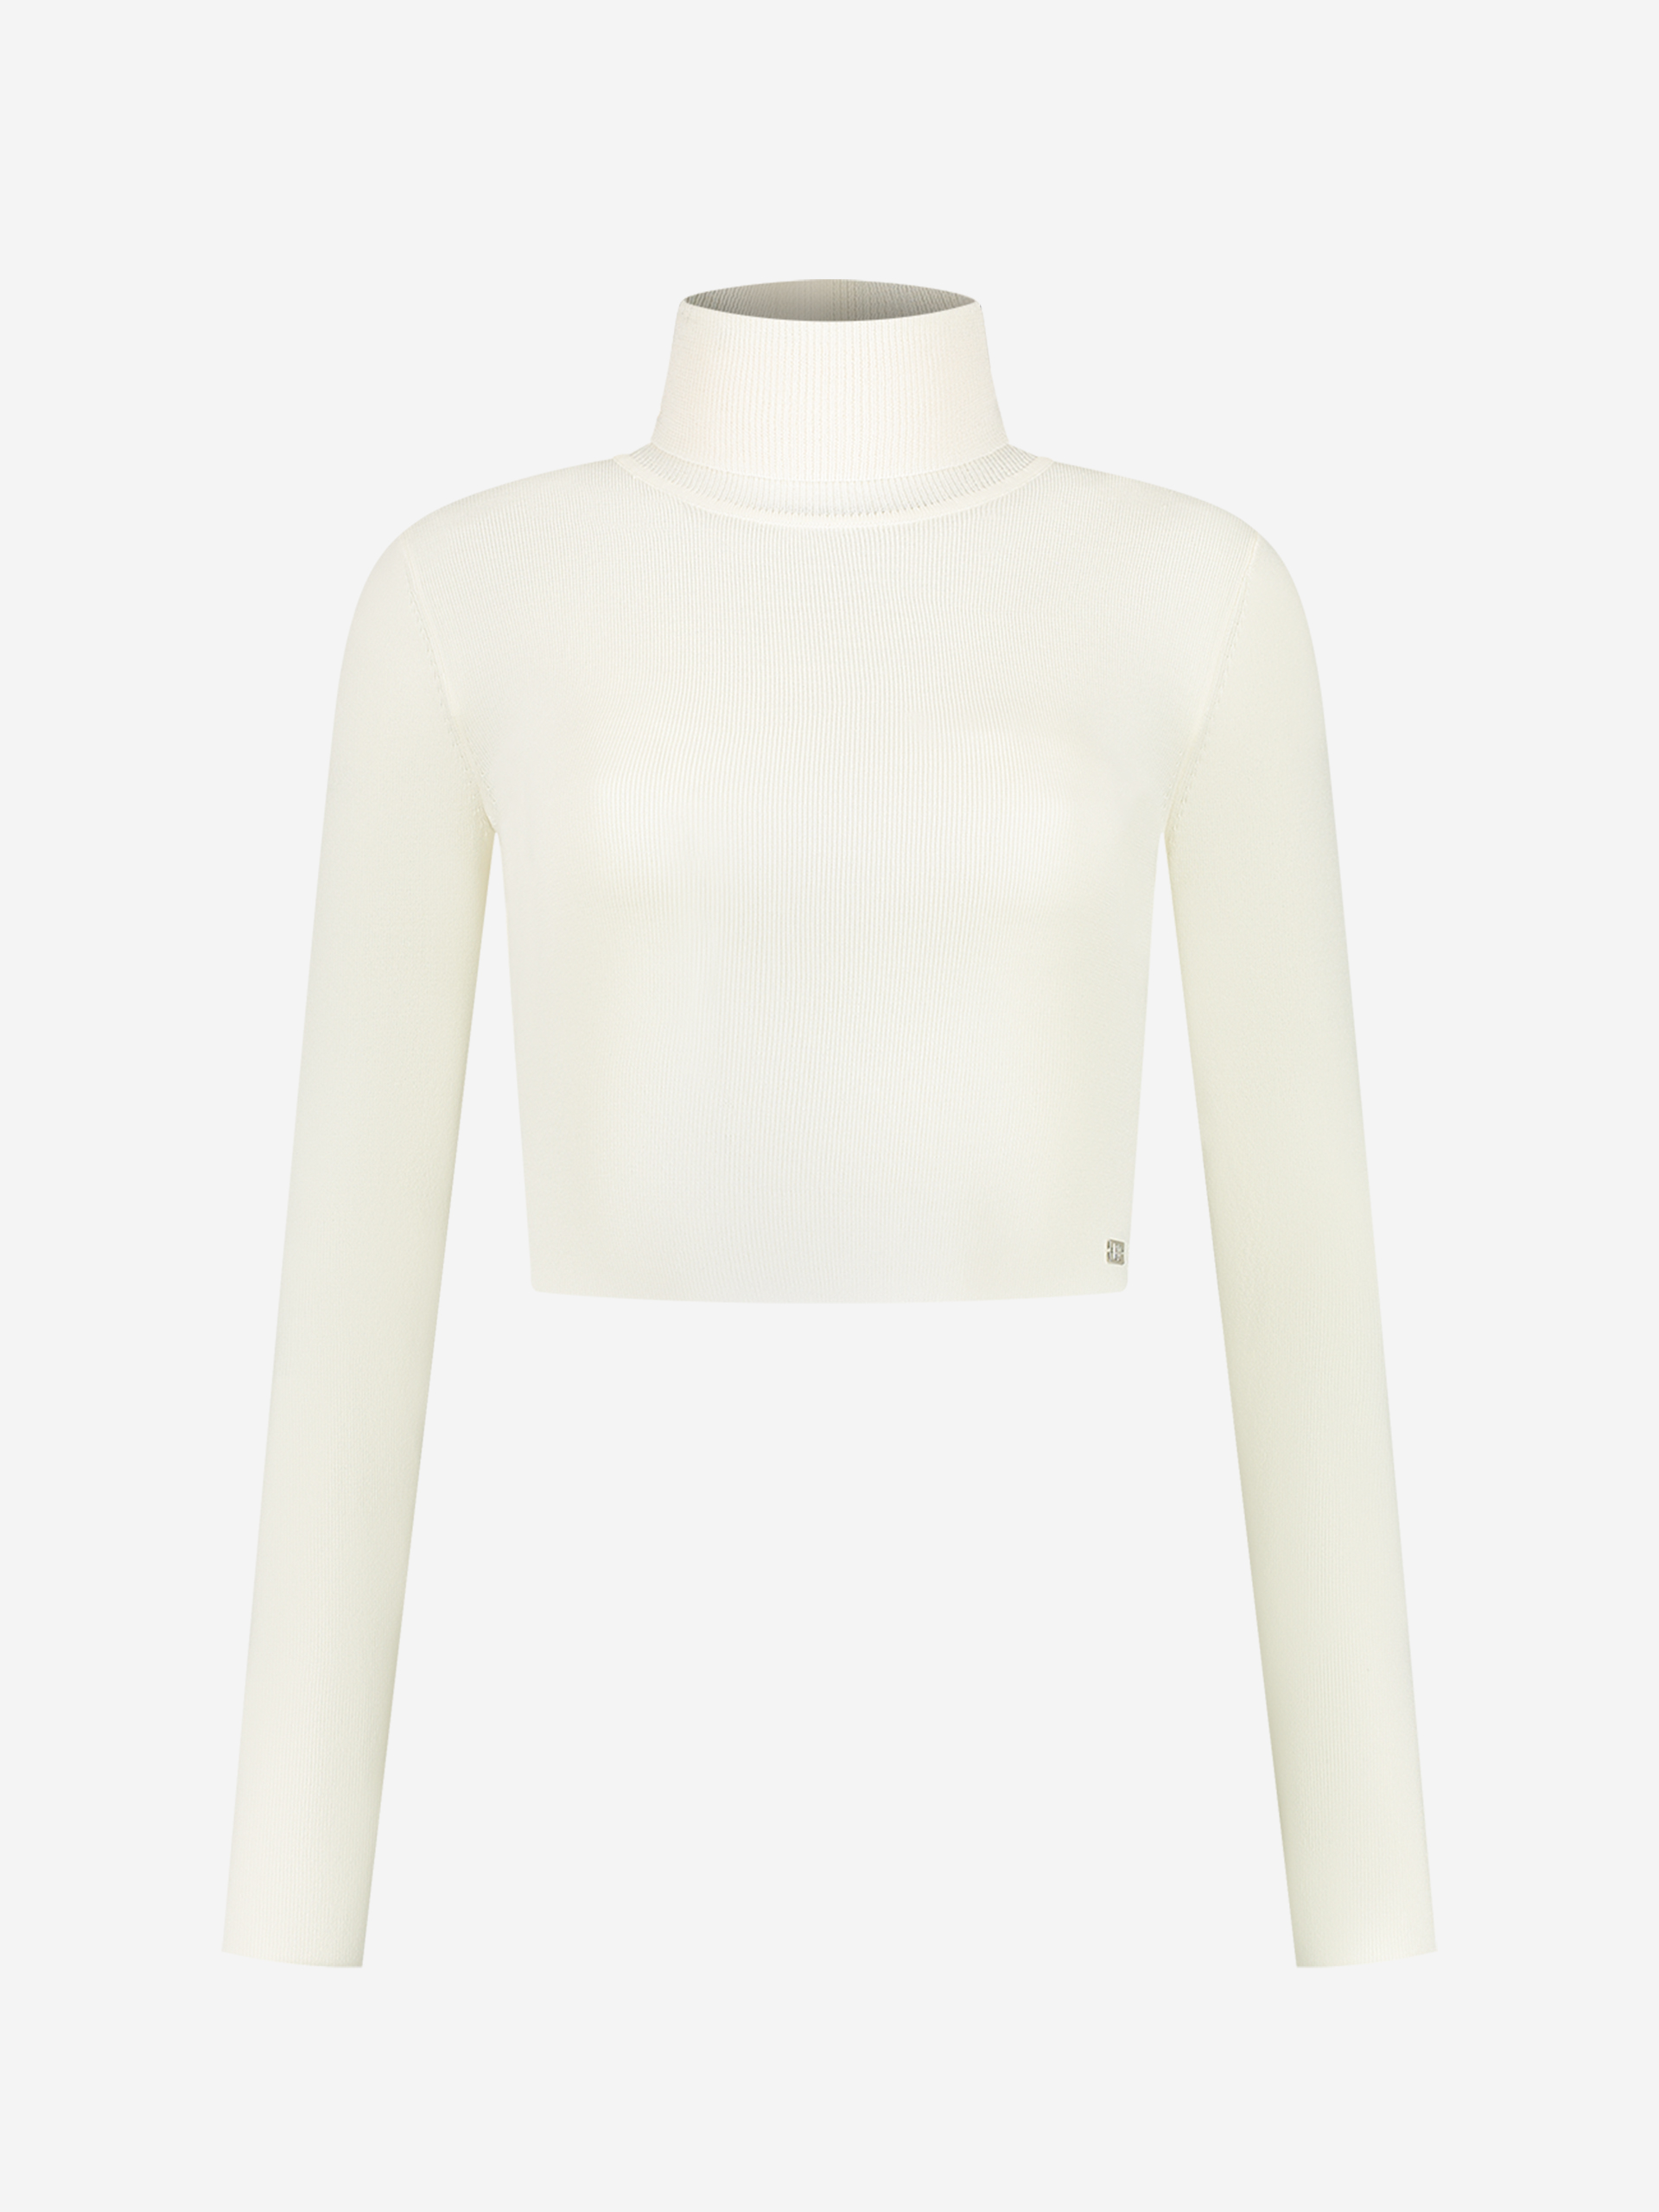  Fitted cropped longsleeve with turtle neck   